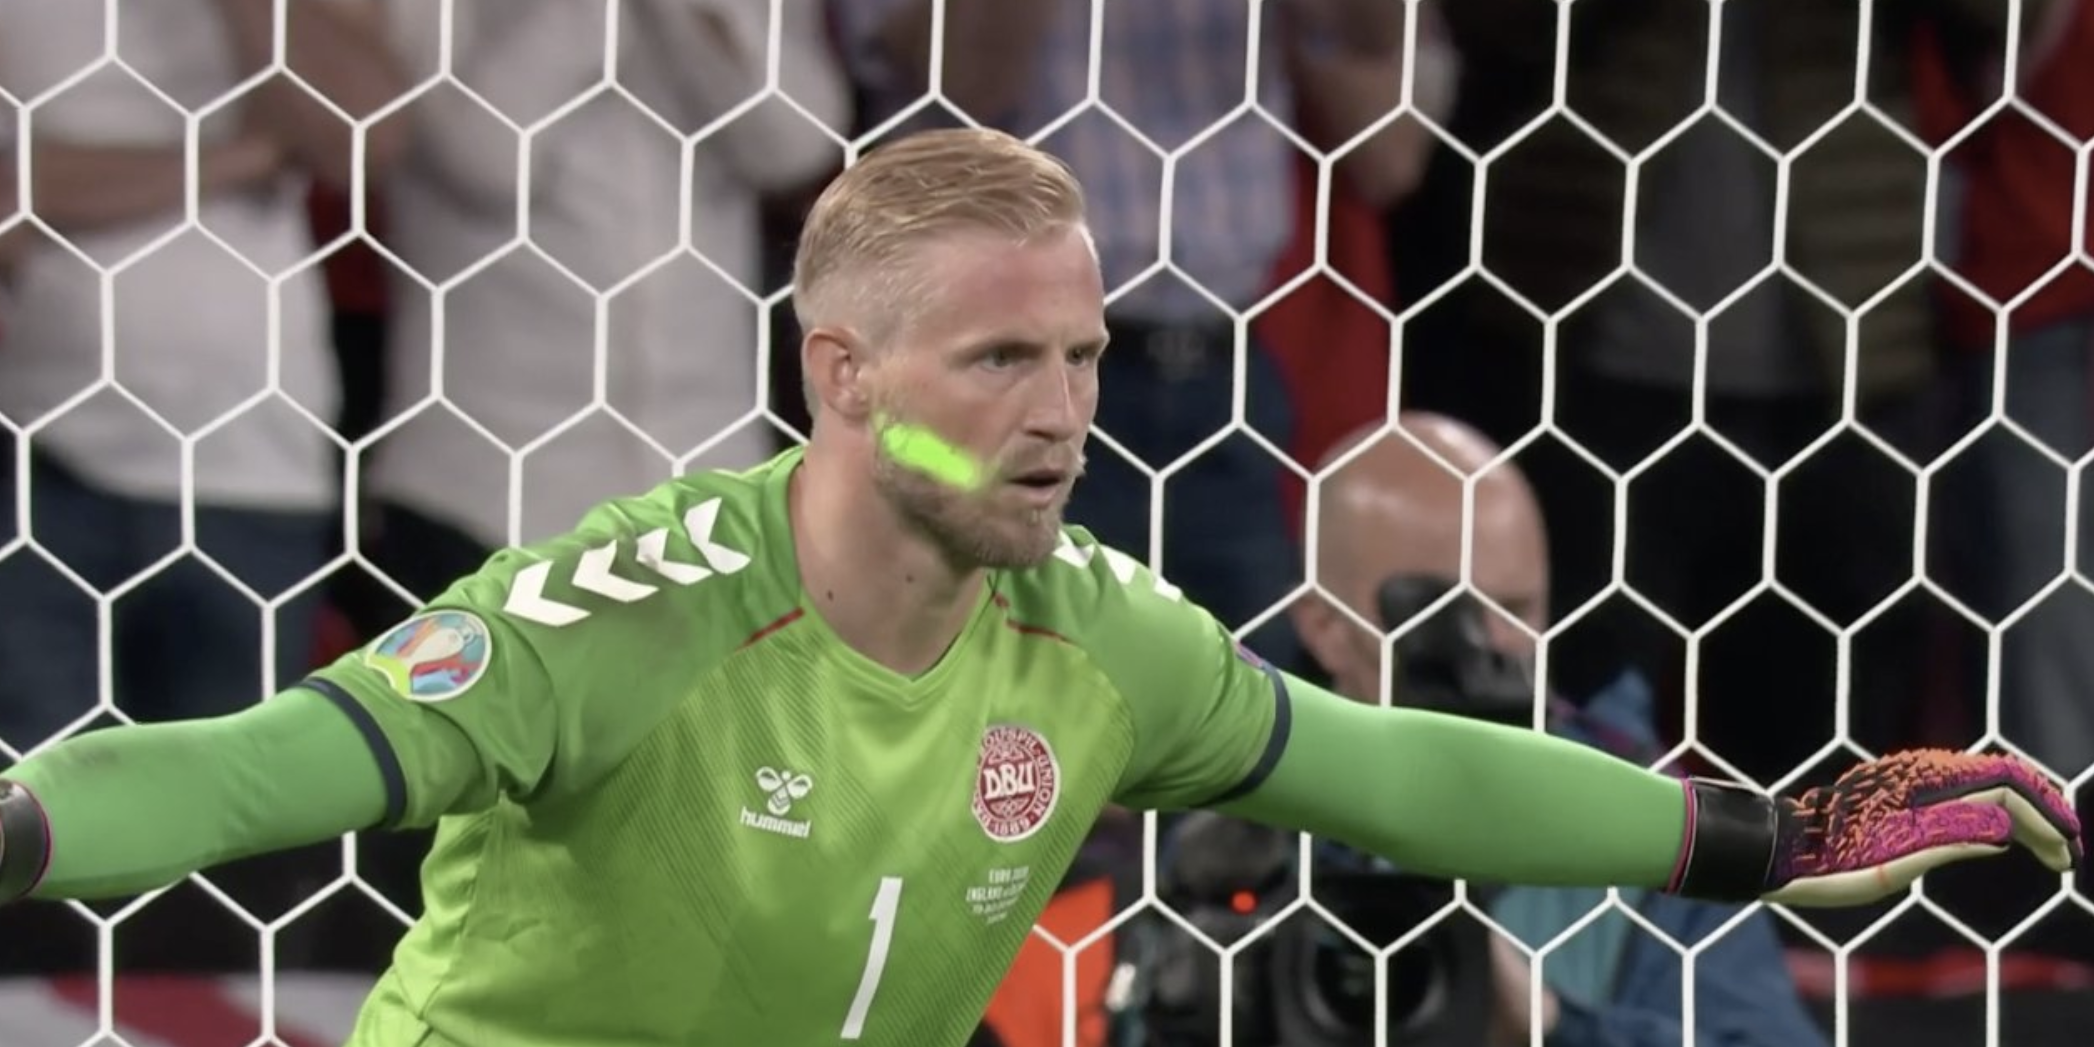 Kasper Schmeichel had a laser pointed at his face just before England's penalty